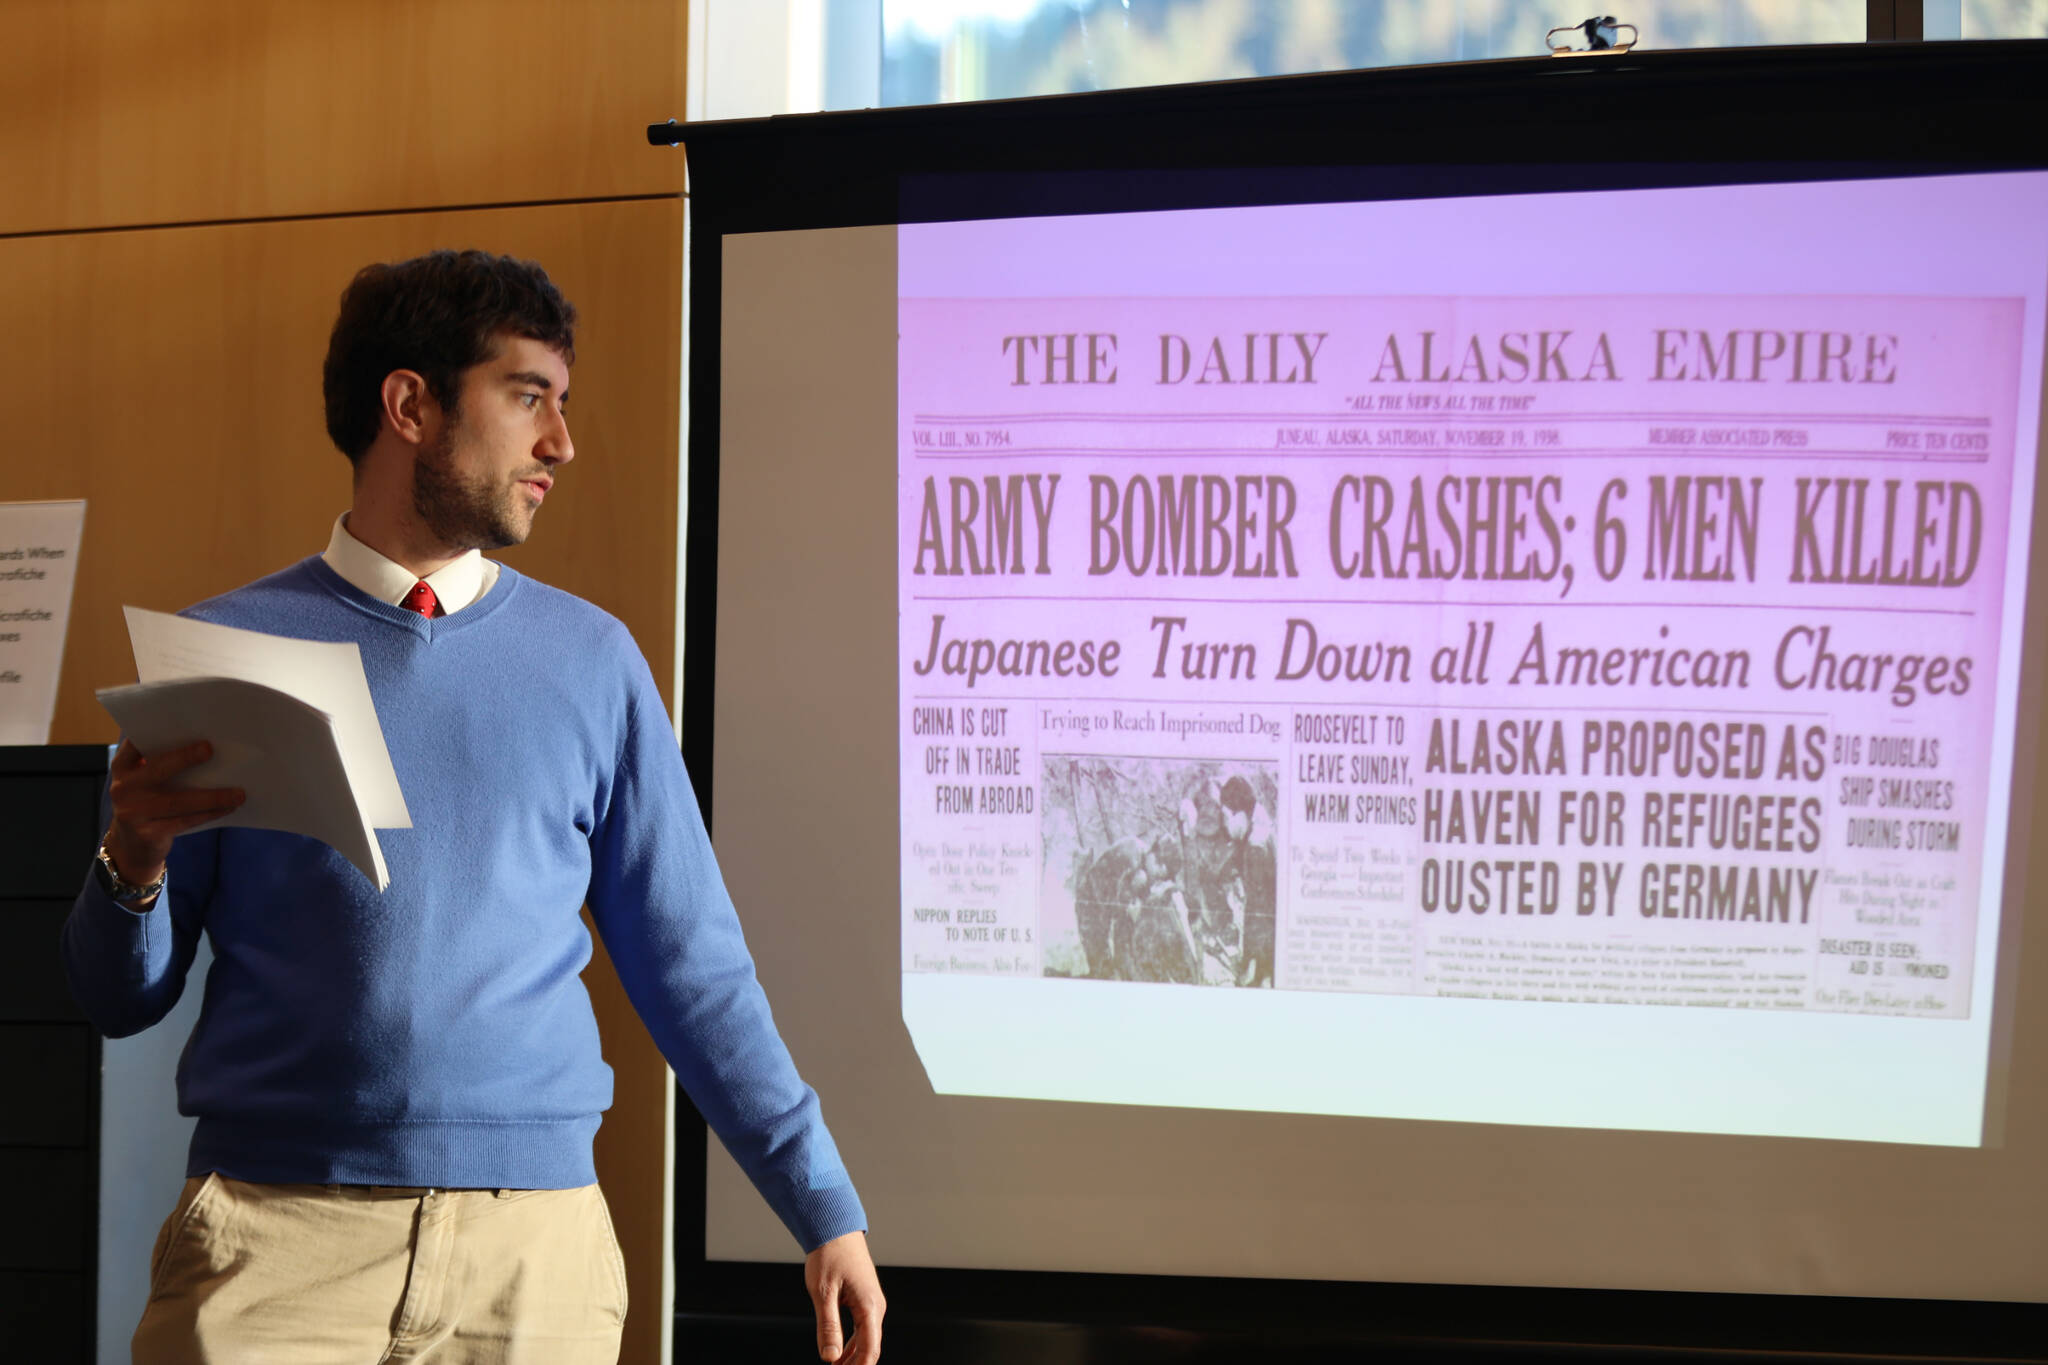 Eric Schmalz gives a lecture at the Andrew P. Kashevaroff Building Thursday afternoon. The lecture examined Alaska newspaper coverage of the American response to Nazism, racism, xenophobia and antisemitism during the 1930s and 1940s. (Clarise Larson / Juneau Empire)